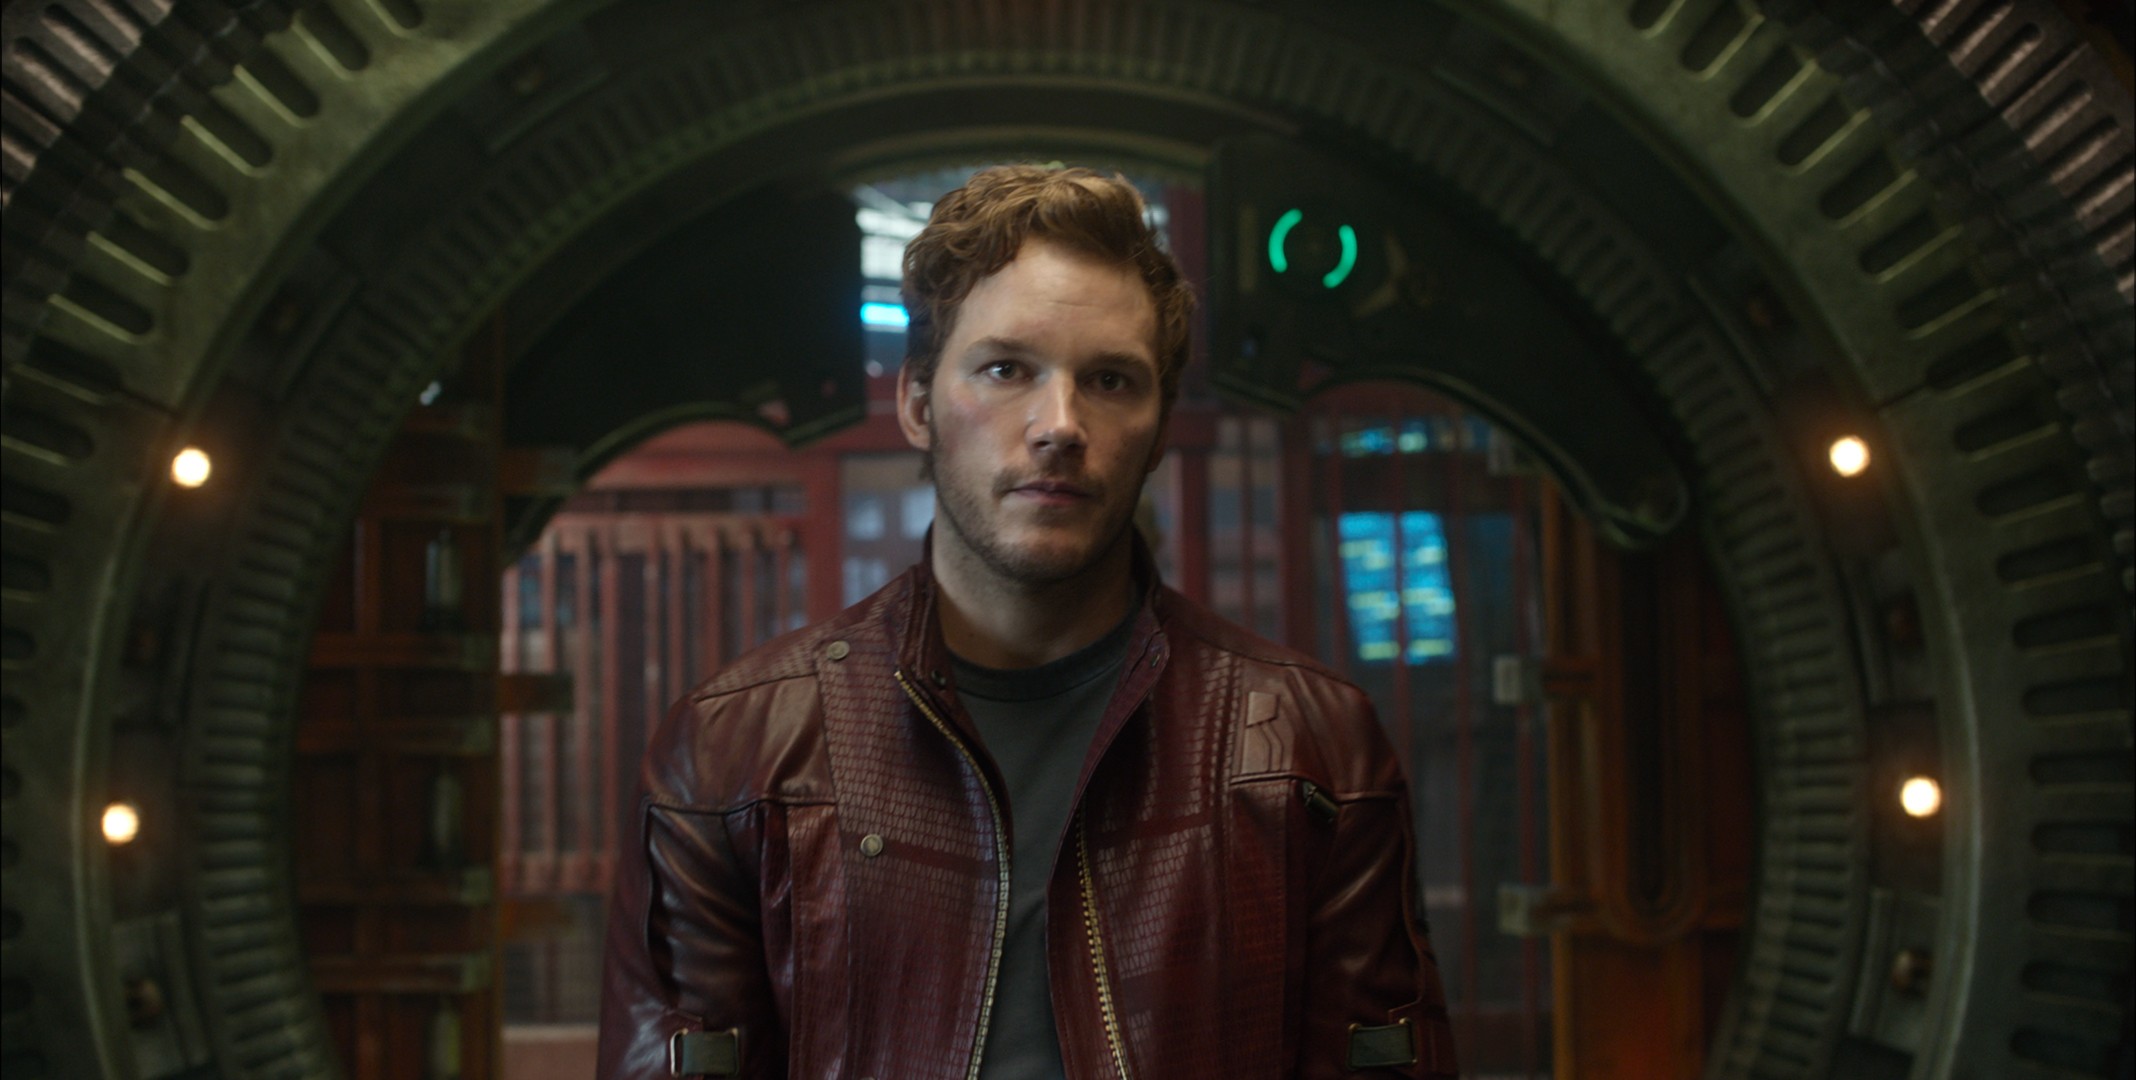 Dude, you are totally our Space-Lord: Pratt makes good.